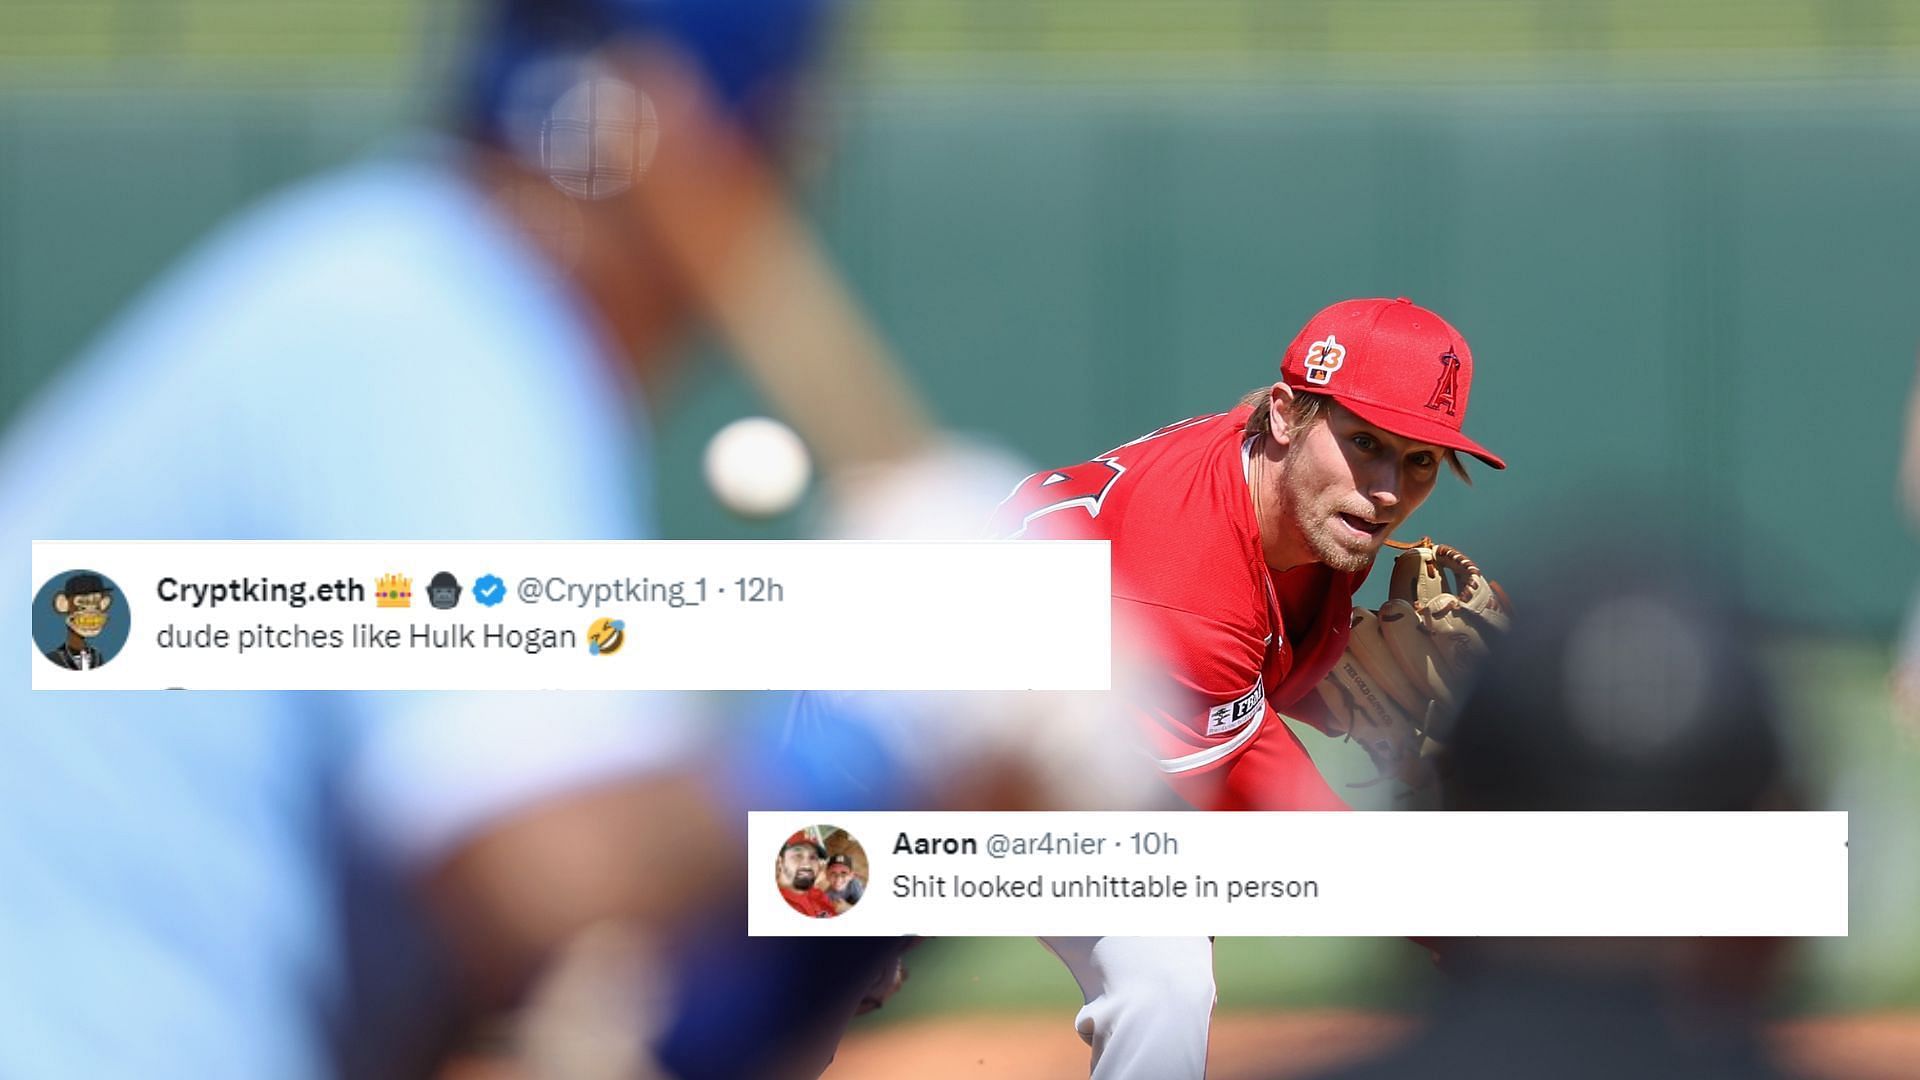 Ben Joyce of the LA Angels has shown off his cannon of an arm again